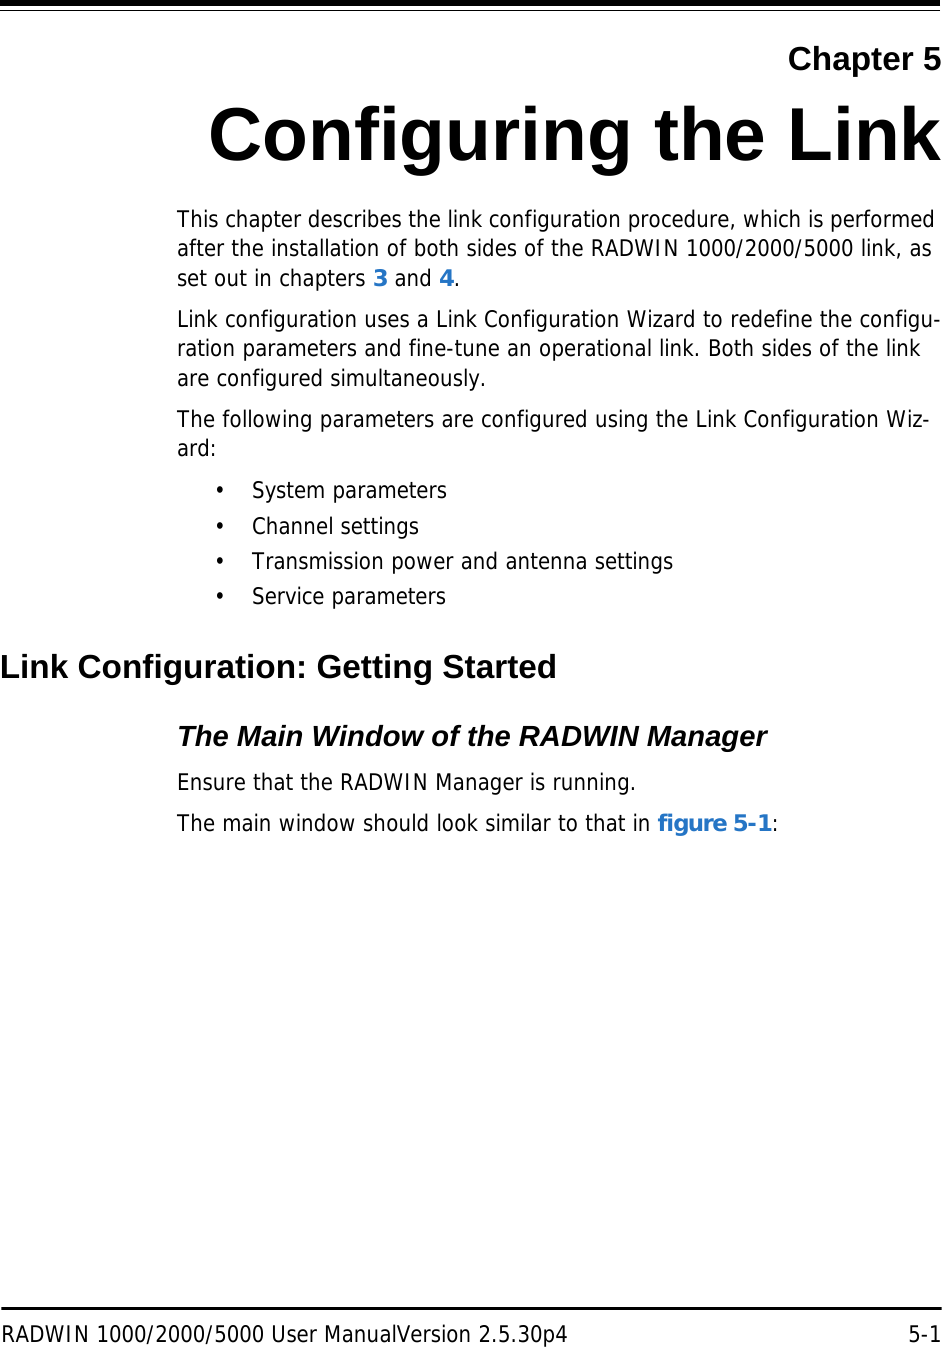 RADWIN 1000/2000/5000 User ManualVersion 2.5.30p4 5-1Chapter 5Configuring the LinkThis chapter describes the link configuration procedure, which is performed after the installation of both sides of the RADWIN 1000/2000/5000 link, as set out in chapters 3 and 4.Link configuration uses a Link Configuration Wizard to redefine the configu-ration parameters and fine-tune an operational link. Both sides of the link are configured simultaneously.The following parameters are configured using the Link Configuration Wiz-ard:• System parameters• Channel settings• Transmission power and antenna settings• Service parametersLink Configuration: Getting StartedThe Main Window of the RADWIN ManagerEnsure that the RADWIN Manager is running.The main window should look similar to that in figure 5-1: